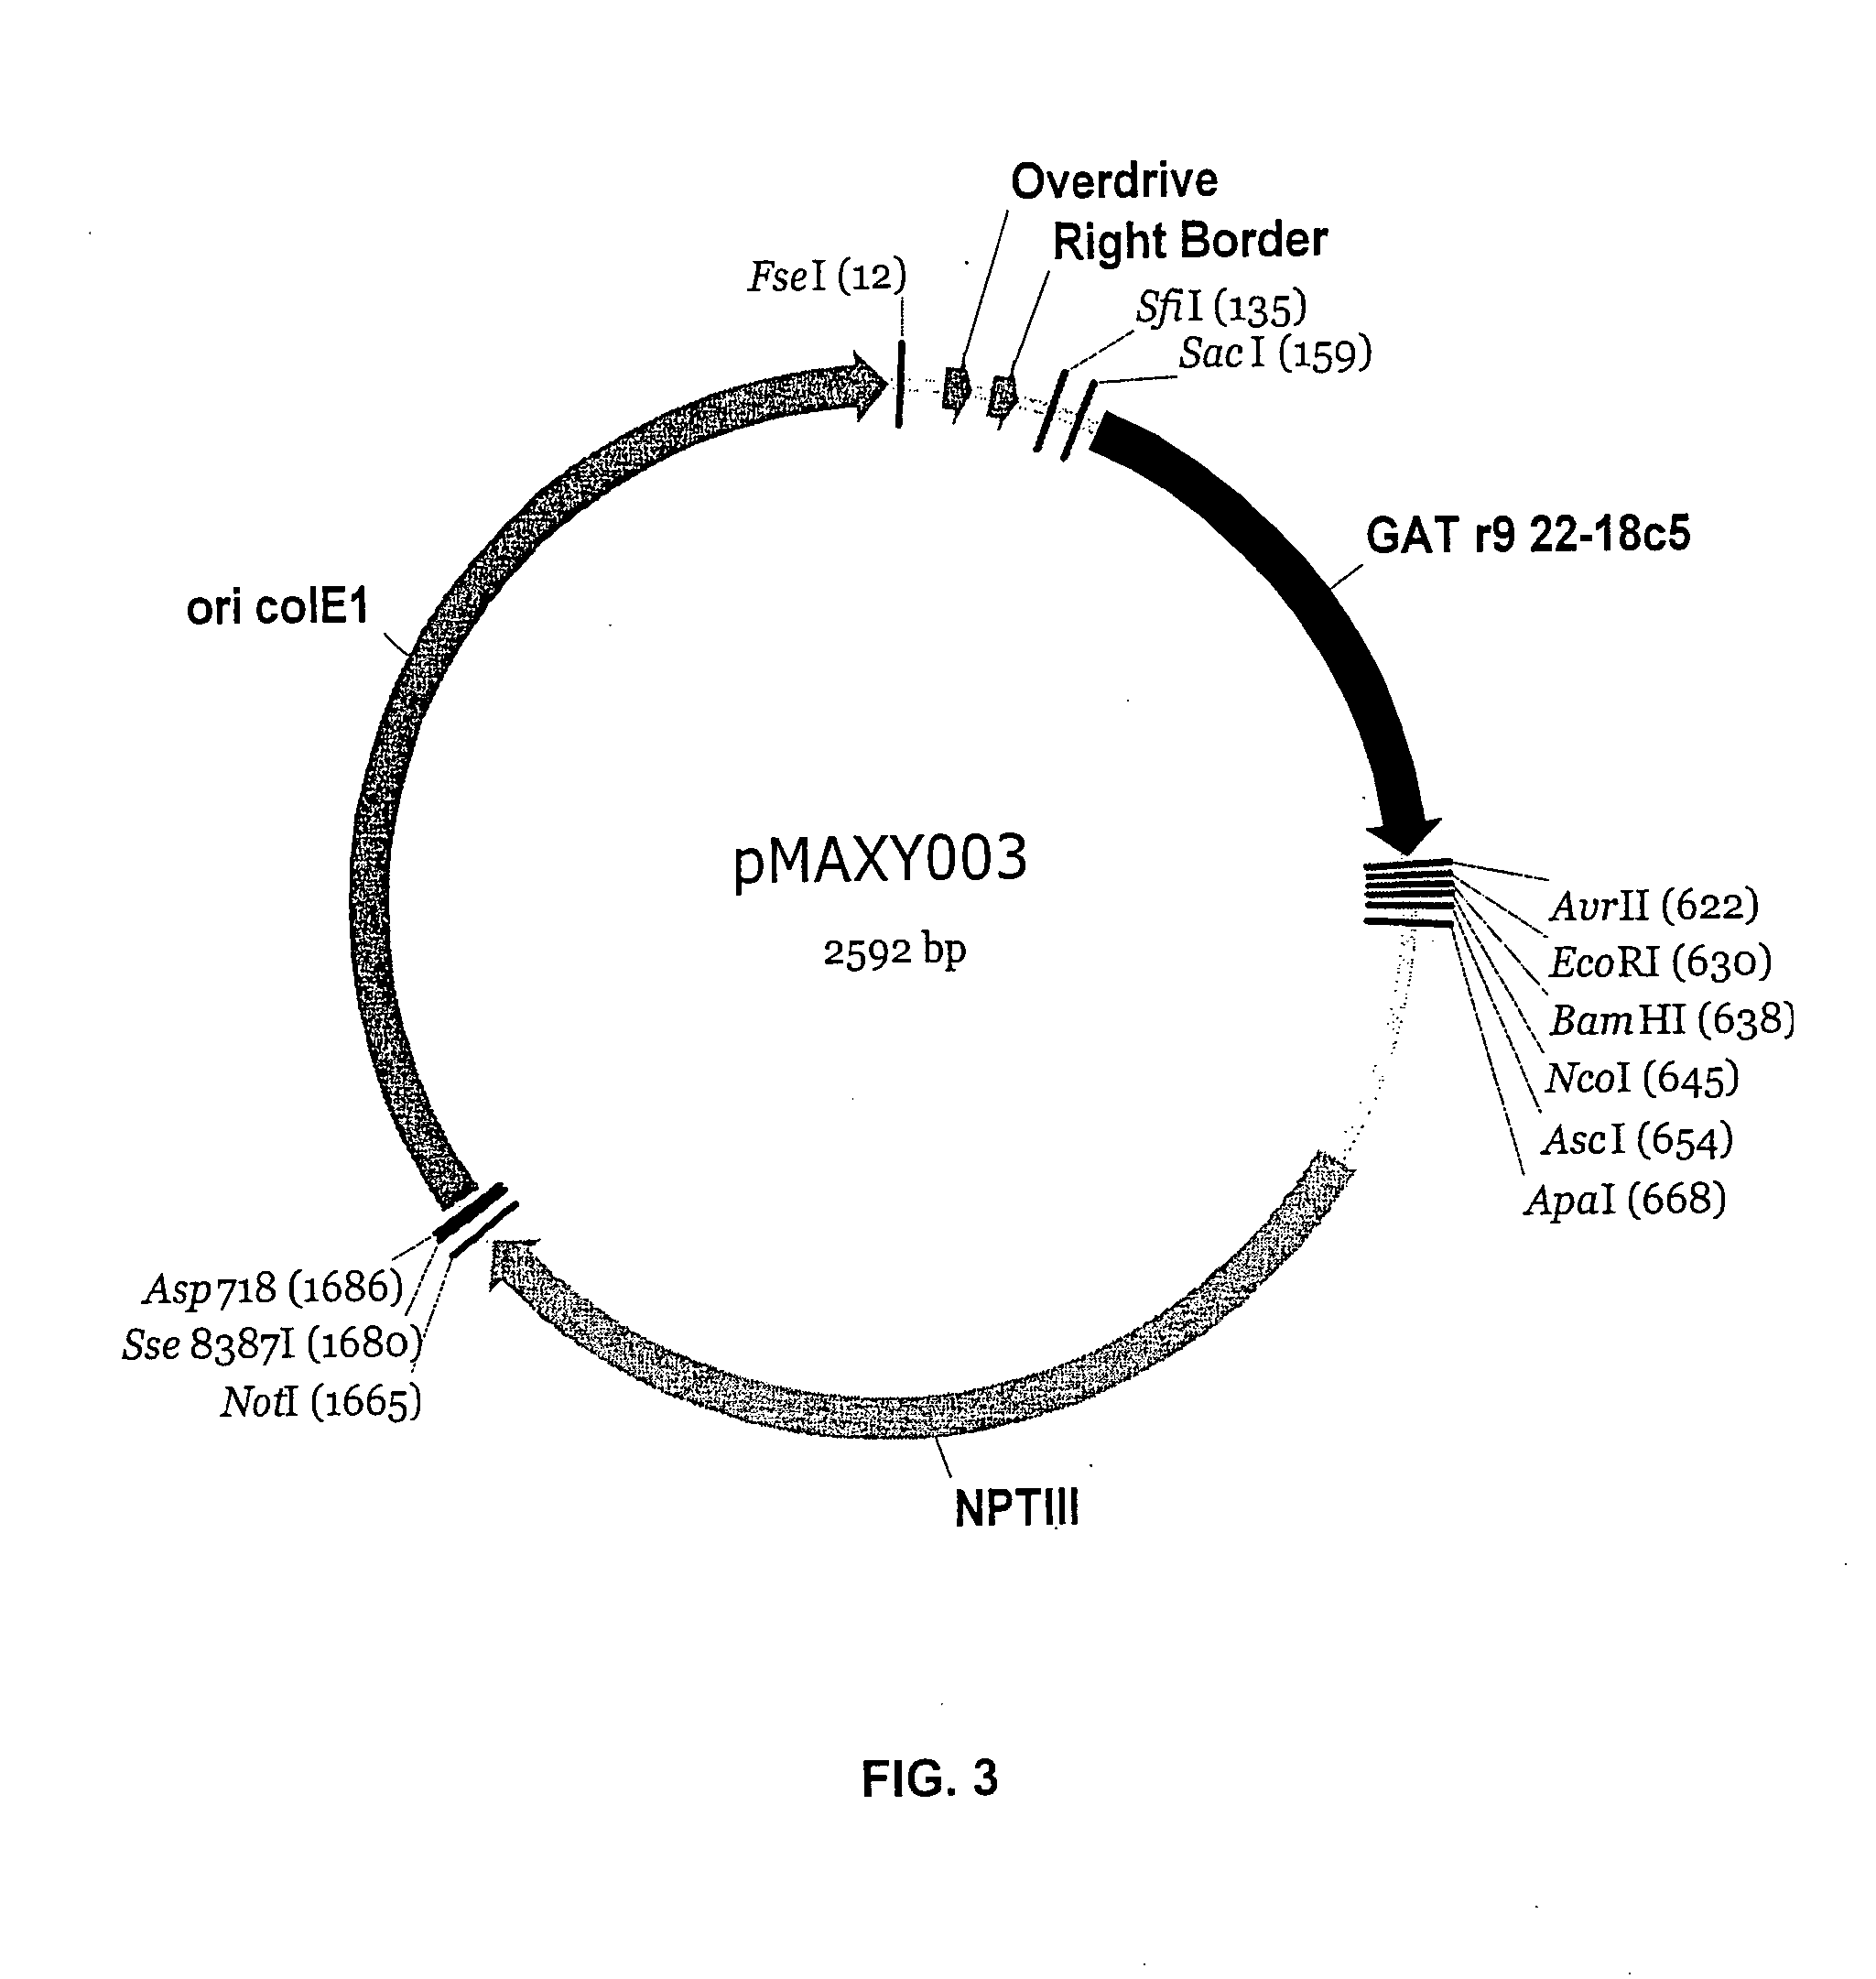 Vectors for plant transformation and methods of use